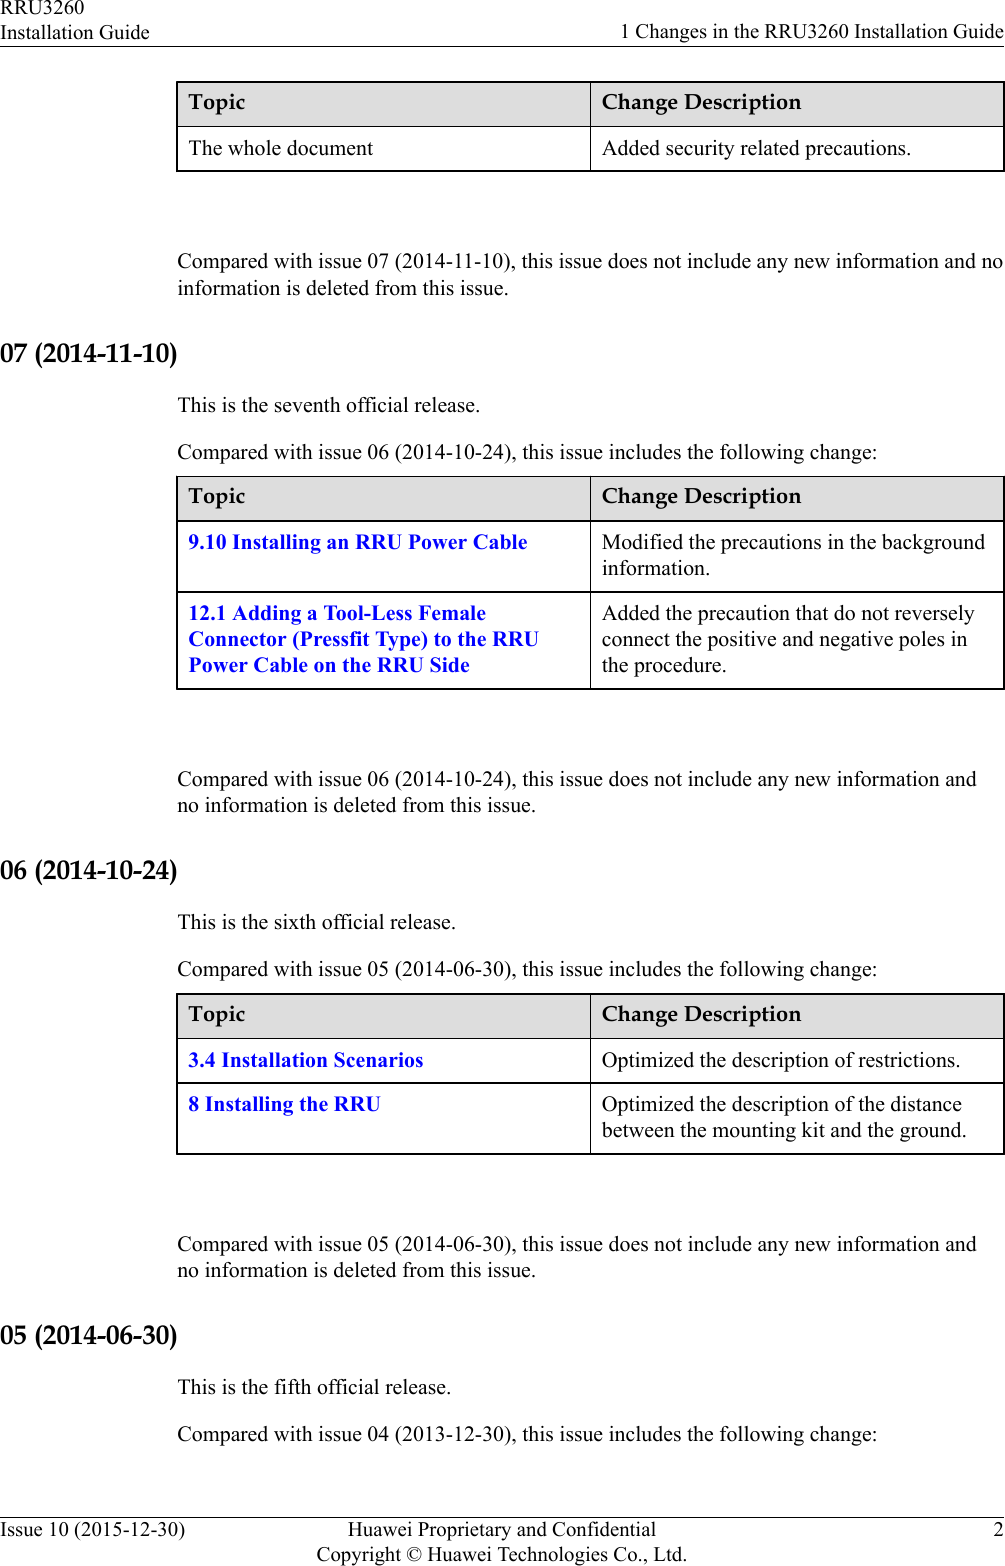 Topic Change DescriptionThe whole document Added security related precautions. Compared with issue 07 (2014-11-10), this issue does not include any new information and noinformation is deleted from this issue.07 (2014-11-10)This is the seventh official release.Compared with issue 06 (2014-10-24), this issue includes the following change:Topic Change Description9.10 Installing an RRU Power Cable Modified the precautions in the backgroundinformation.12.1 Adding a Tool-Less FemaleConnector (Pressfit Type) to the RRUPower Cable on the RRU SideAdded the precaution that do not reverselyconnect the positive and negative poles inthe procedure. Compared with issue 06 (2014-10-24), this issue does not include any new information andno information is deleted from this issue.06 (2014-10-24)This is the sixth official release.Compared with issue 05 (2014-06-30), this issue includes the following change:Topic Change Description3.4 Installation Scenarios Optimized the description of restrictions.8 Installing the RRU Optimized the description of the distancebetween the mounting kit and the ground. Compared with issue 05 (2014-06-30), this issue does not include any new information andno information is deleted from this issue.05 (2014-06-30)This is the fifth official release.Compared with issue 04 (2013-12-30), this issue includes the following change:RRU3260Installation Guide 1 Changes in the RRU3260 Installation GuideIssue 10 (2015-12-30) Huawei Proprietary and ConfidentialCopyright © Huawei Technologies Co., Ltd.2